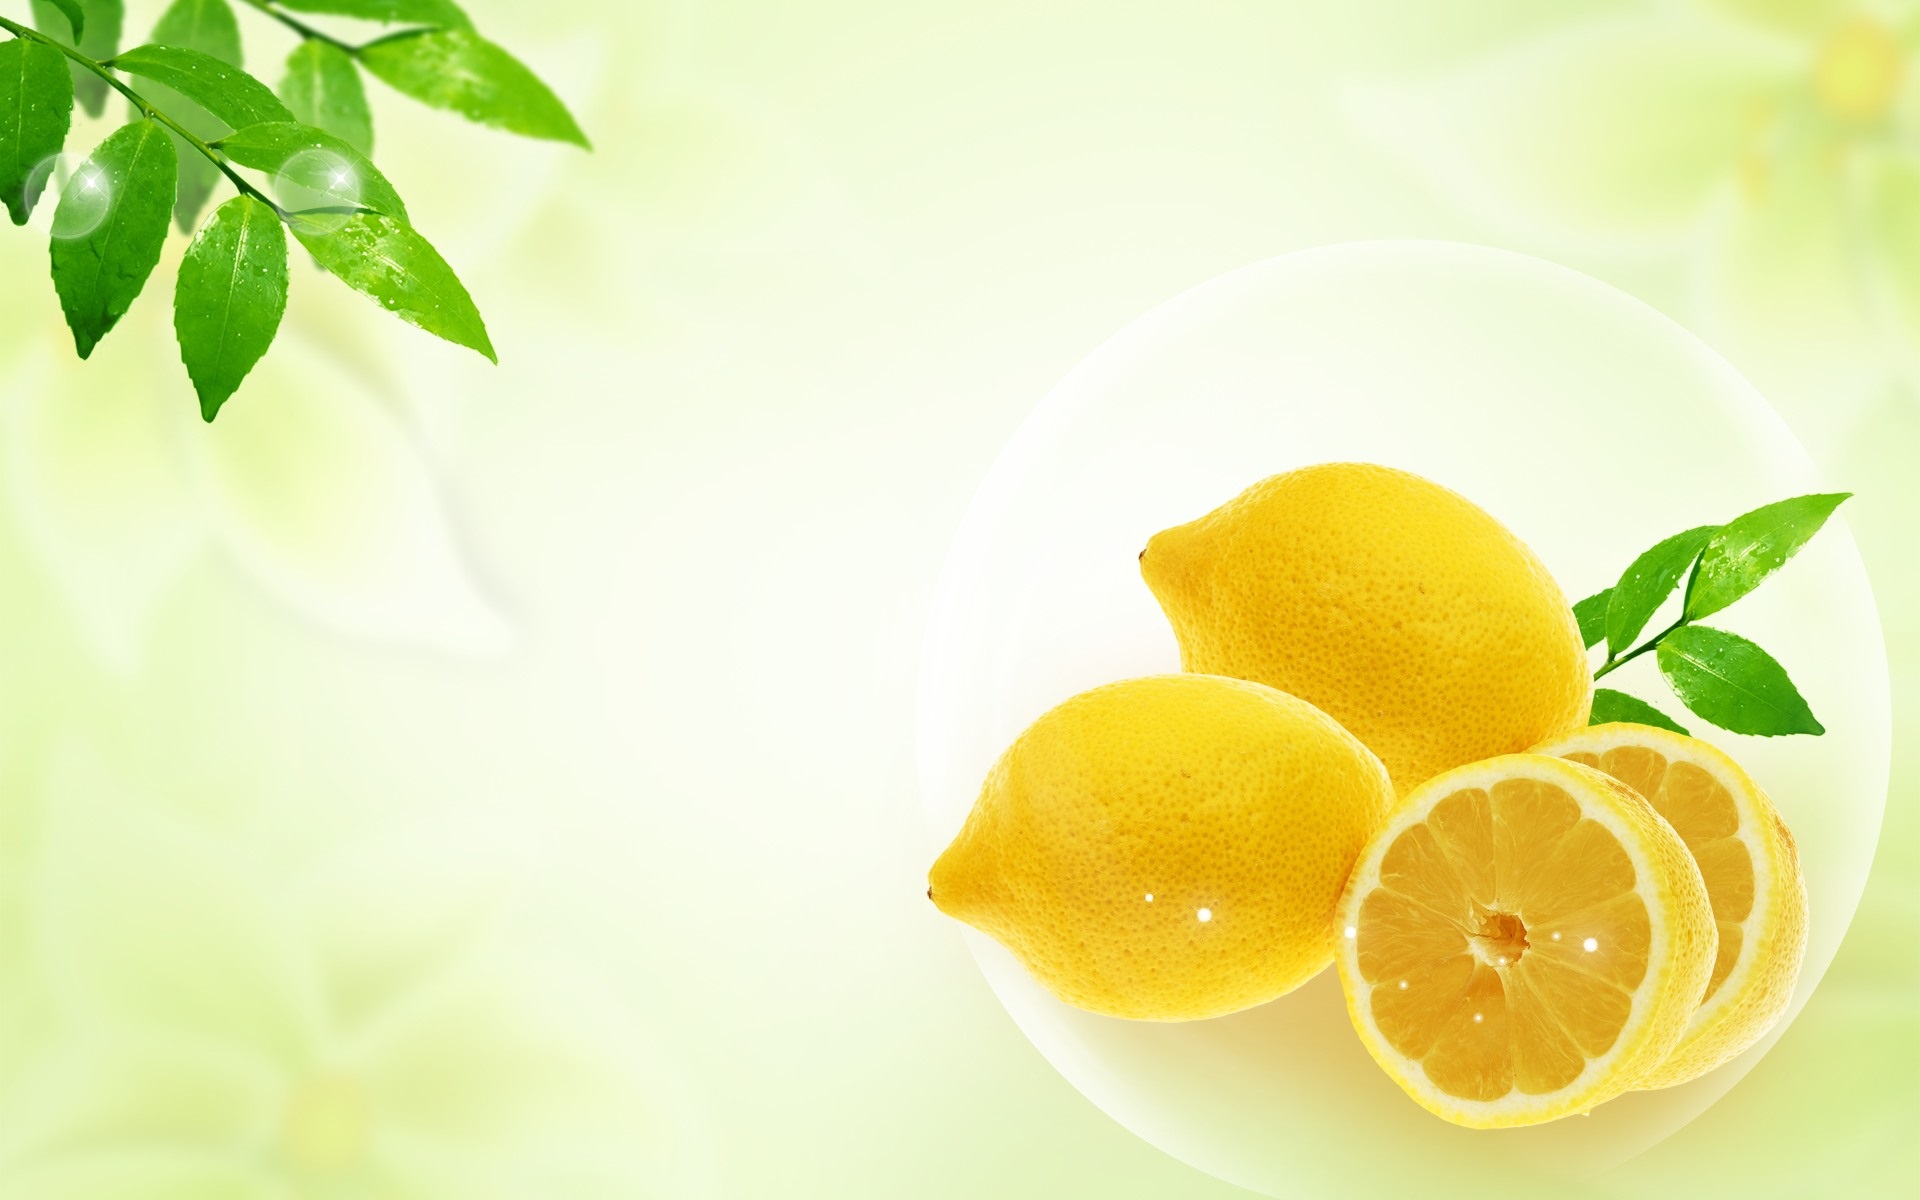 Wallpapers Fresh lemon, green leaves 1920x1200 HD Picture, Image.